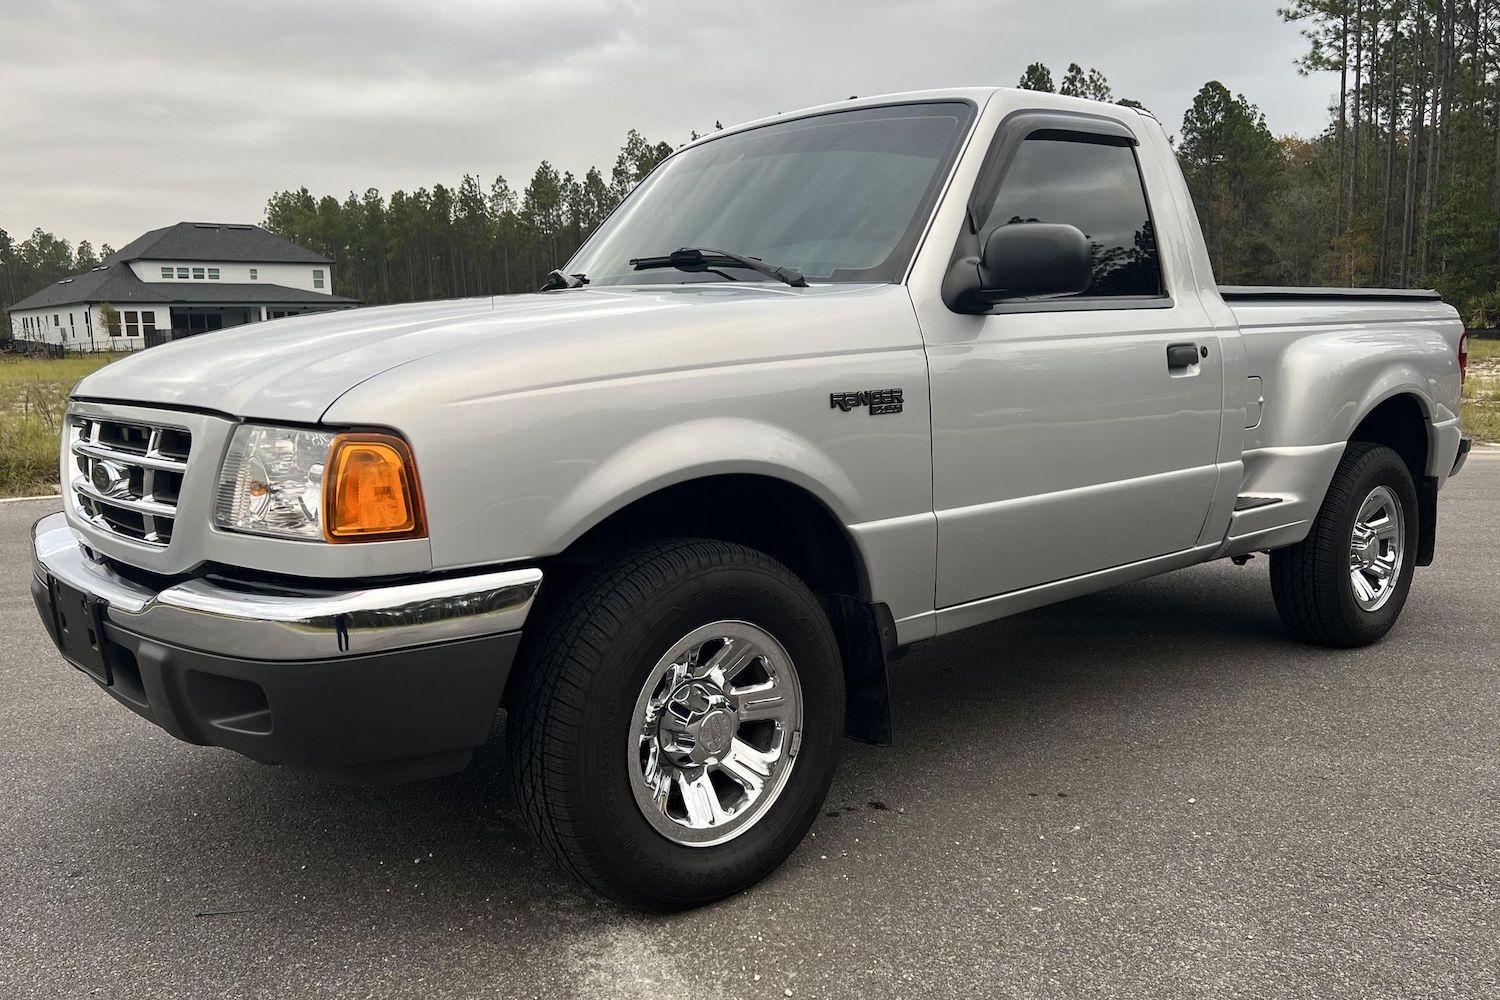 2001 Ford Ranger XLT Flareside With 41K Miles Up For Auction